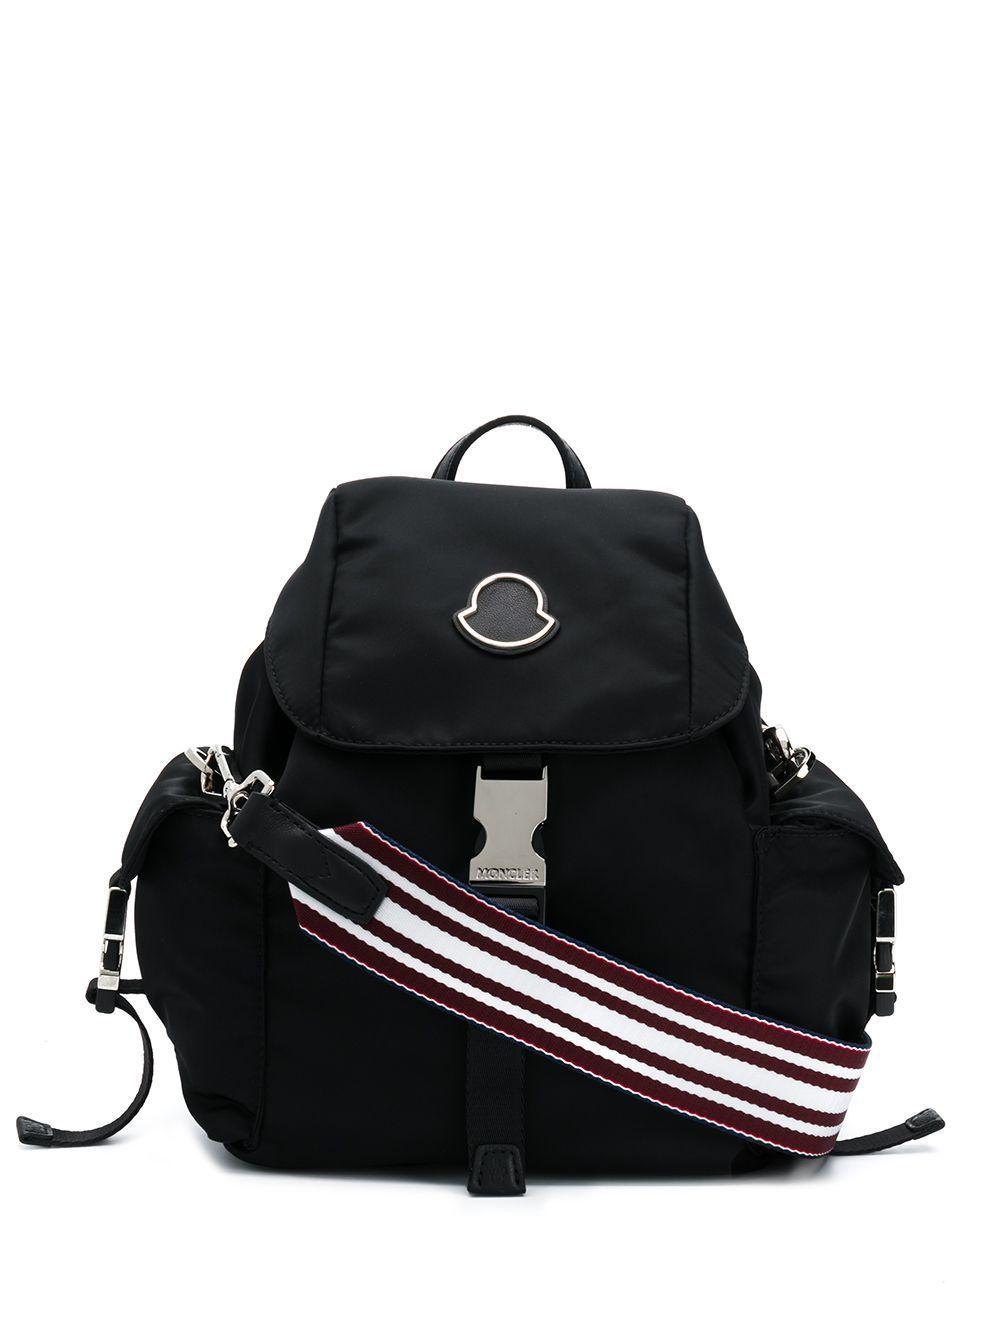 Moncler Leather Dauphine Backpack in Black - Lyst